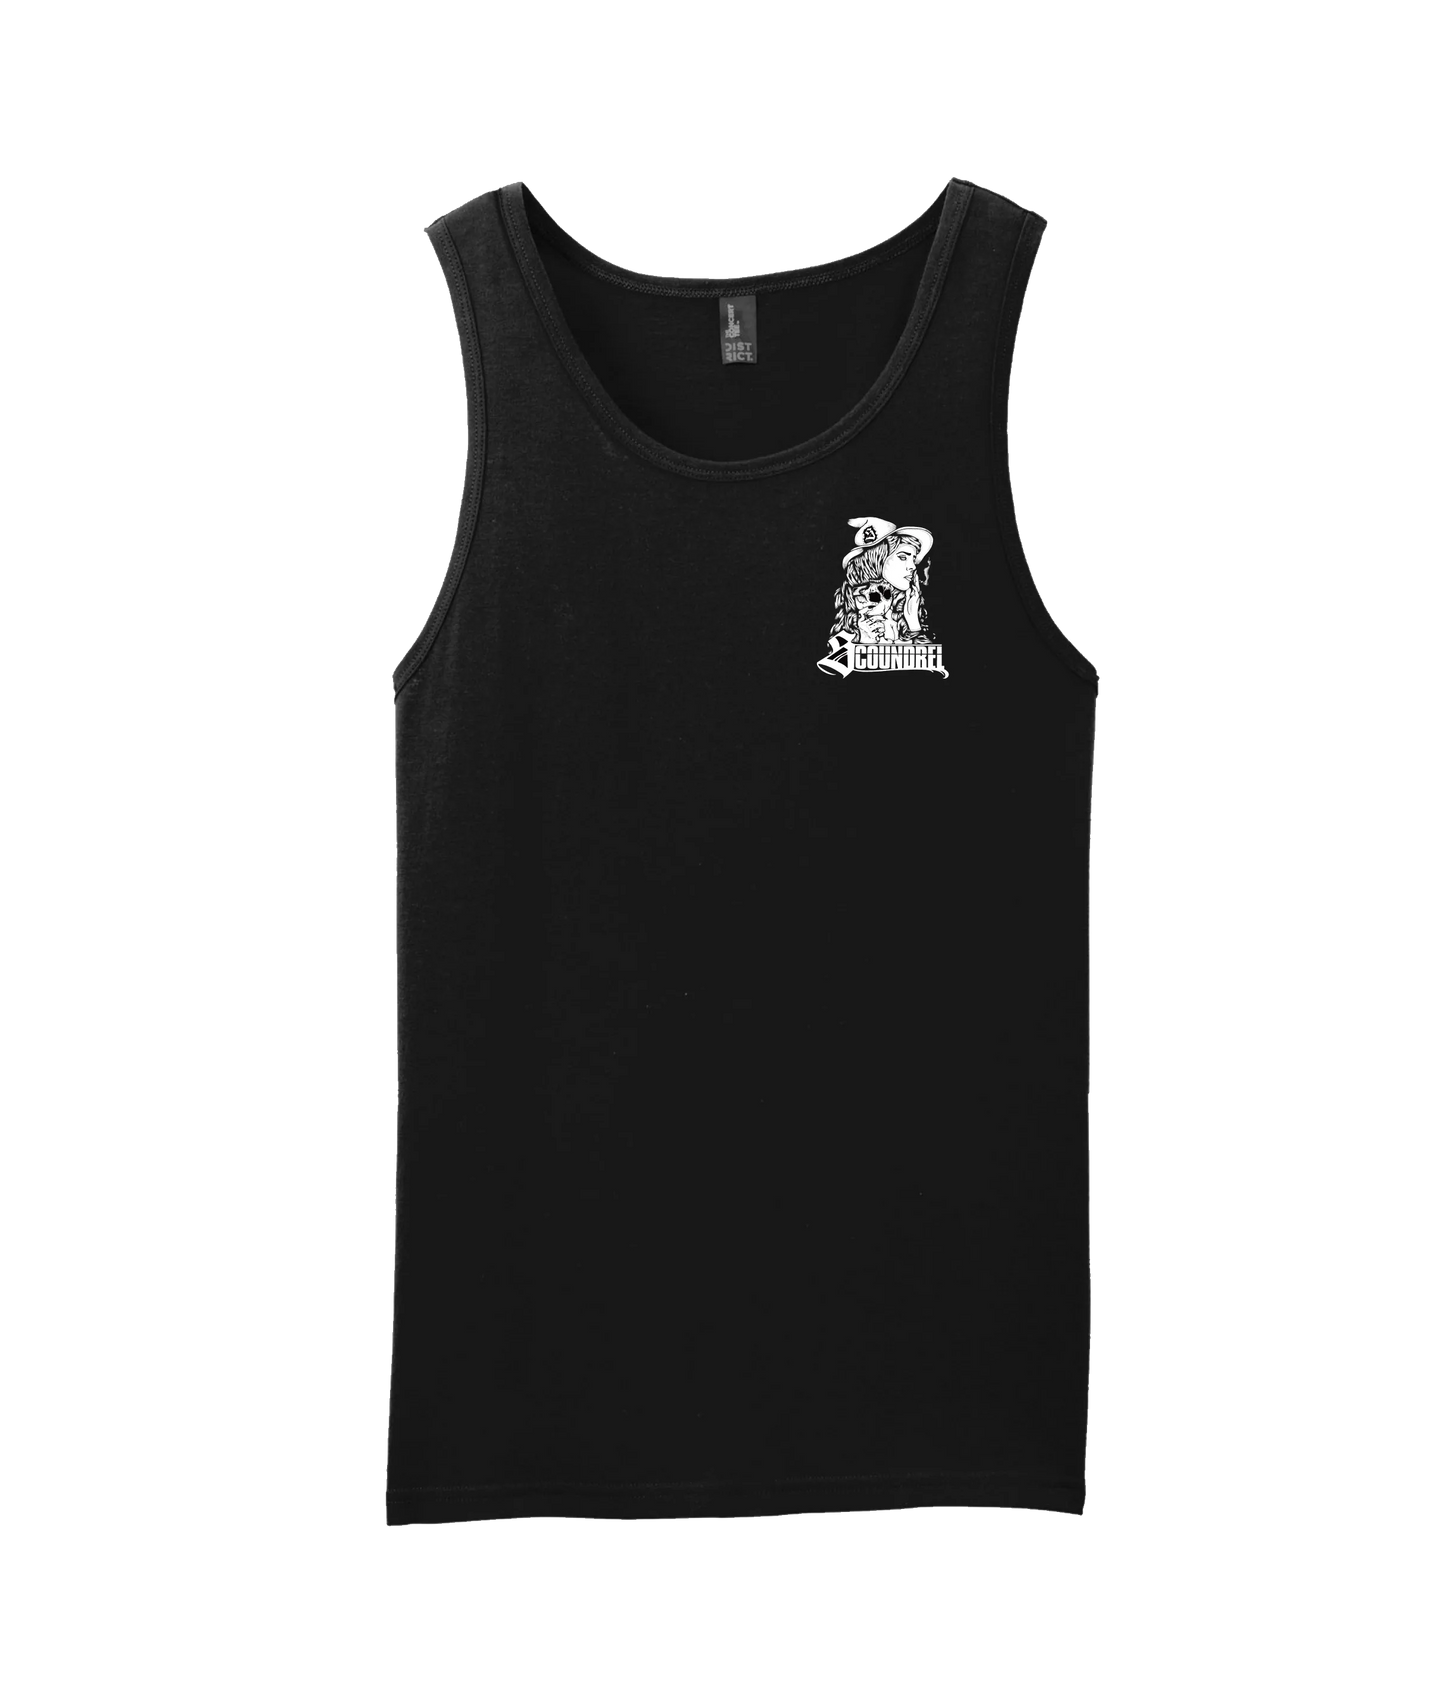 Scoundrel - Witch - Black Tank Top